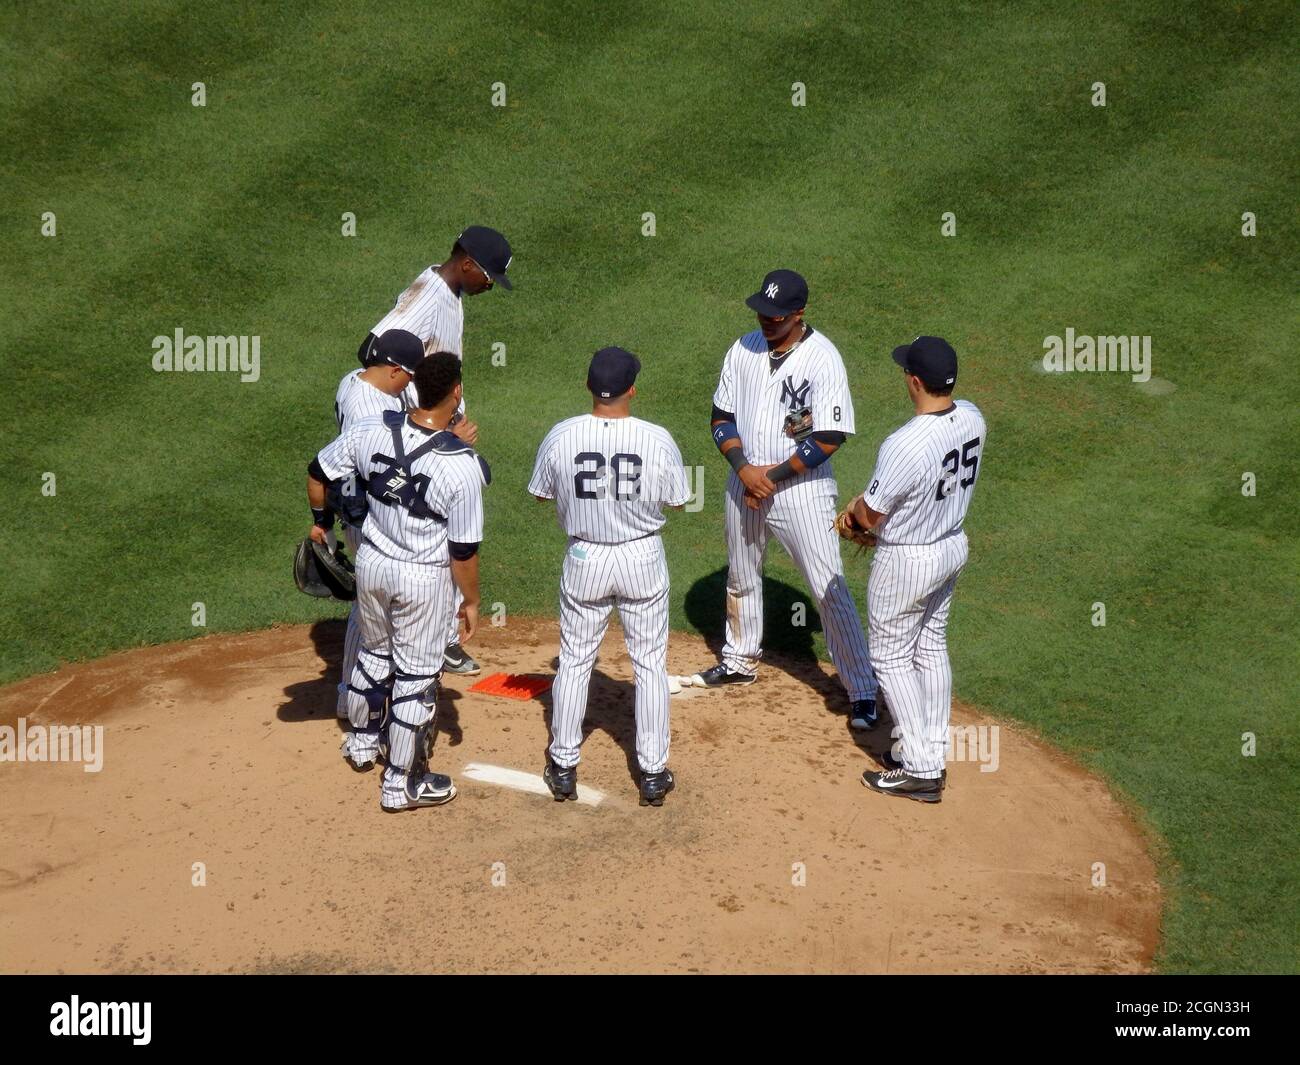 New York Yankees players have a discussion on the pitcher's mound, Yankee Stadium, New York City, United States Stock Photo